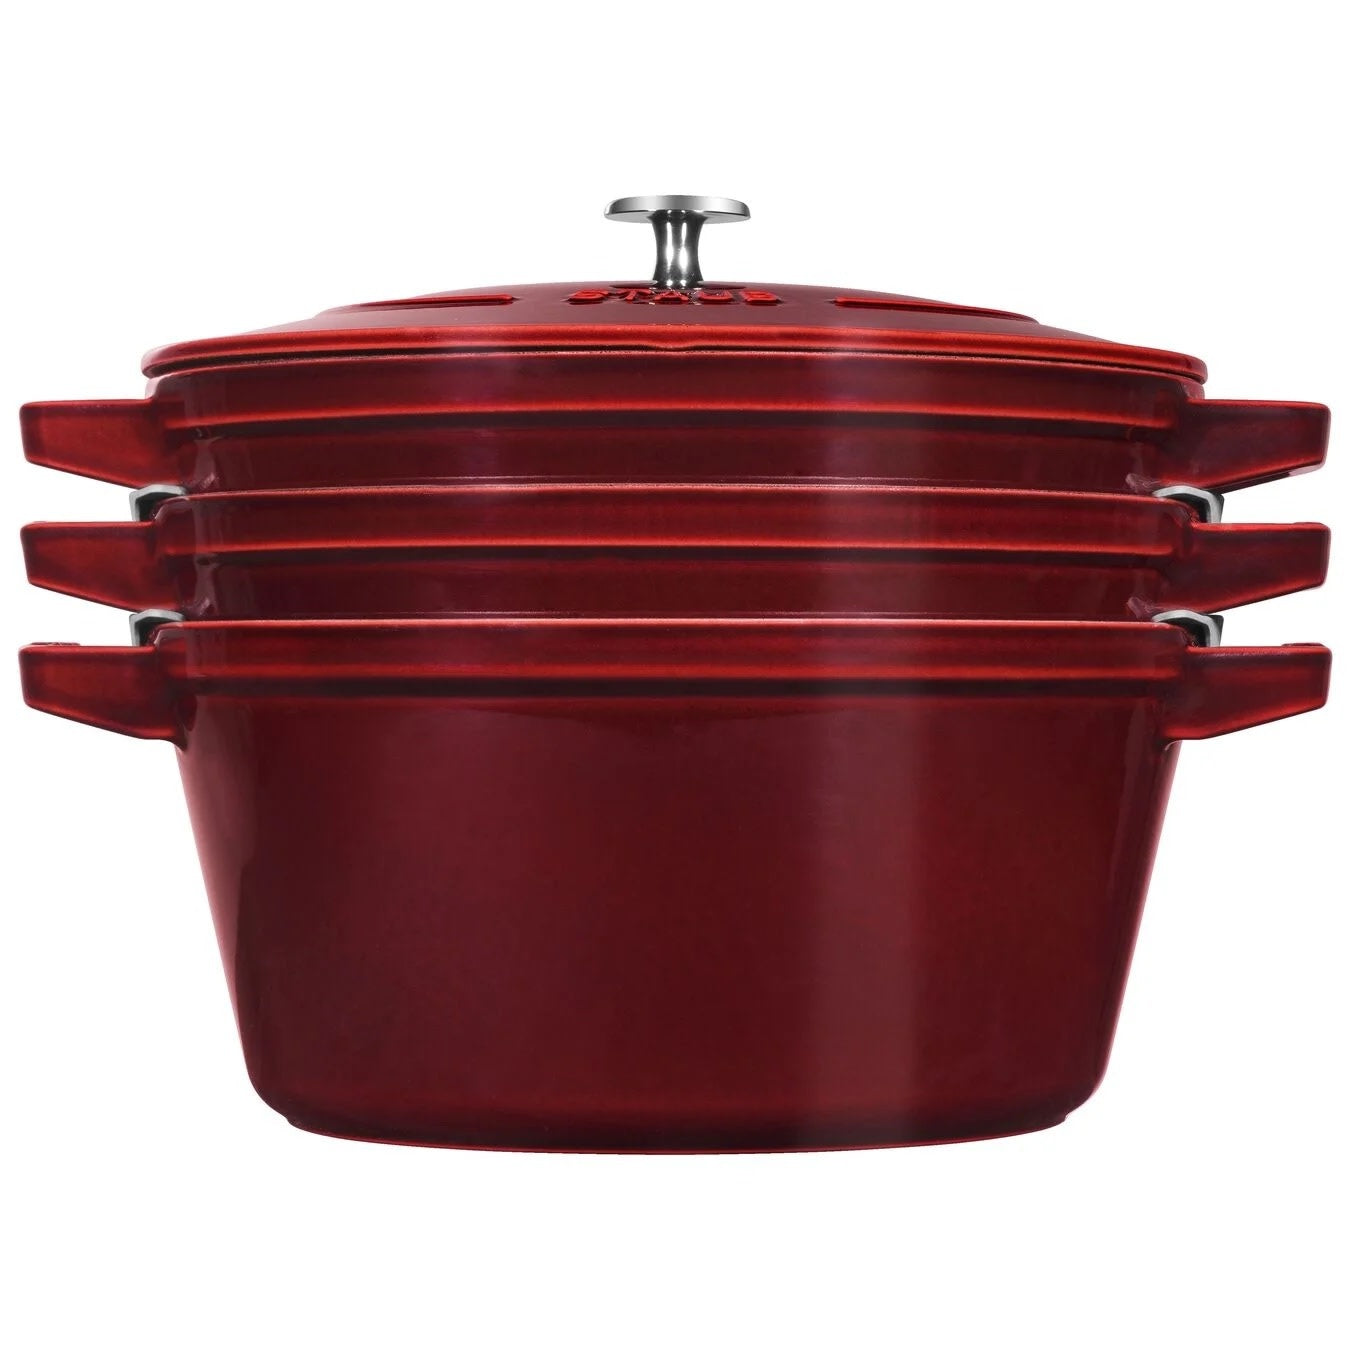  STAUB Cast Iron Set 4-pc, Stackable Space-Saving Cookware Set,  Dutch Oven, Skillet, Grill Pan with Universal Lid, Made in France, Cherry:  Home & Kitchen